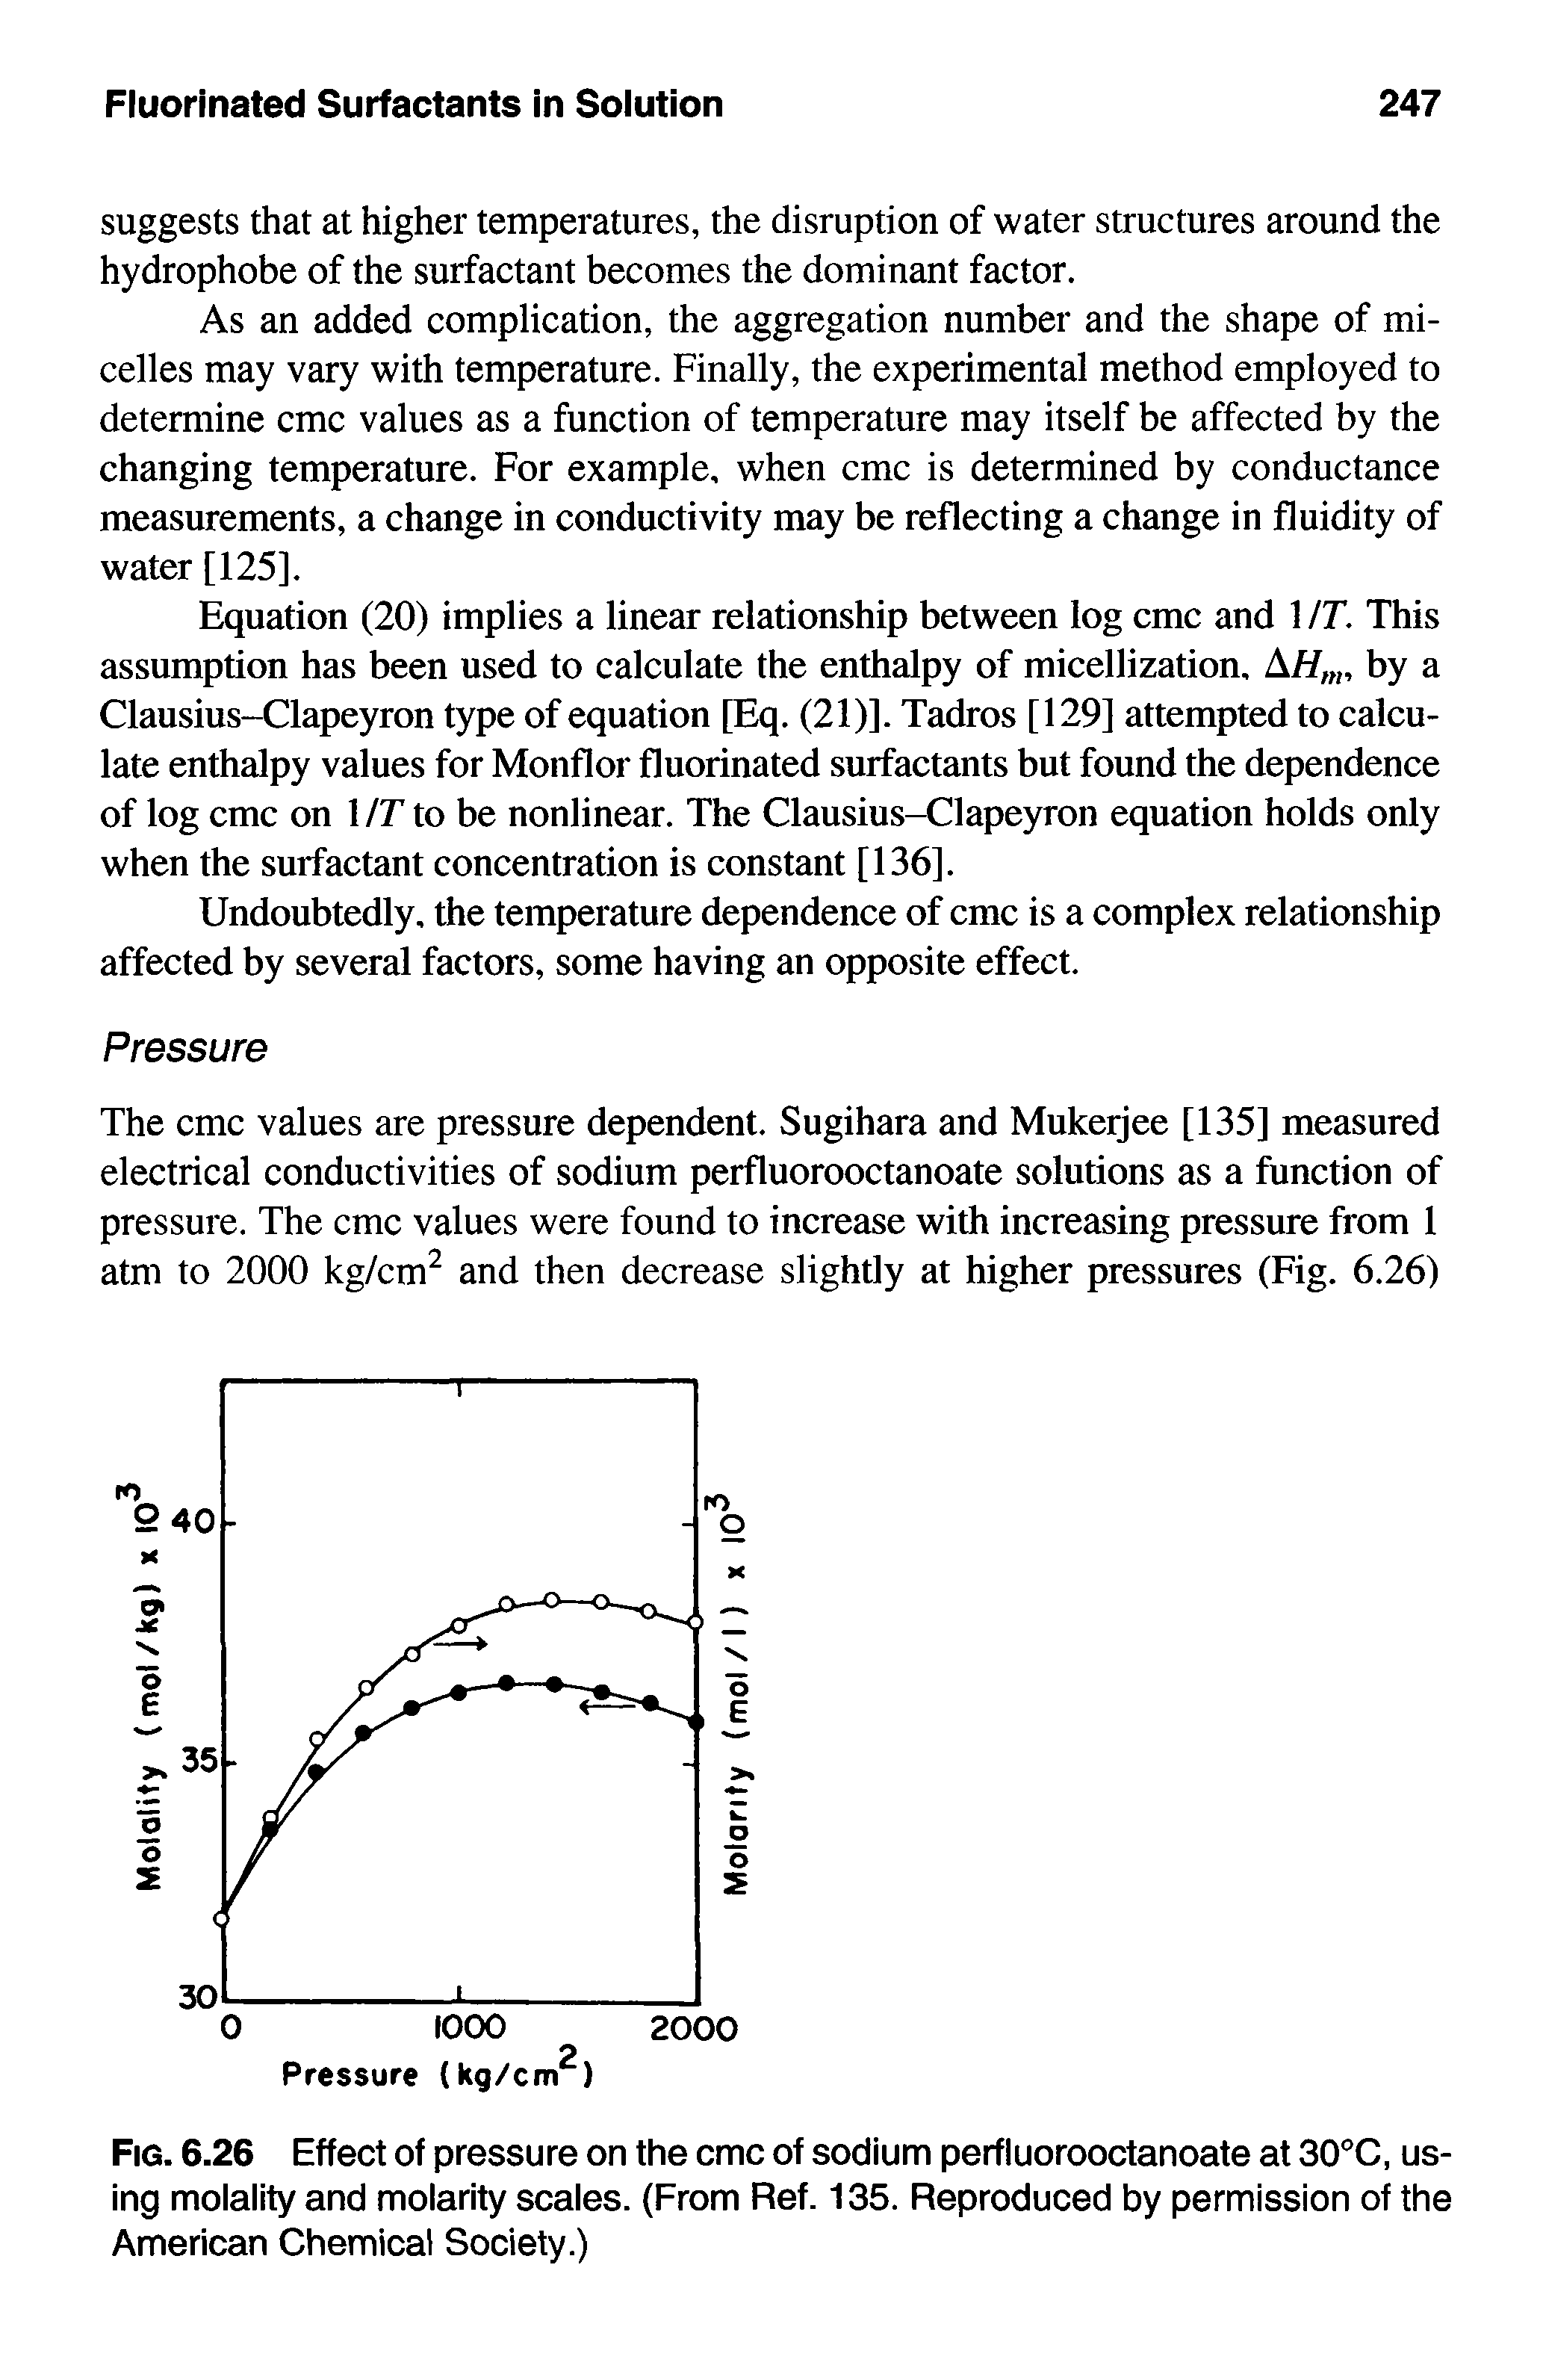 Fig. 6.26 Effect of pressure on the cmc of sodium perfluorooctanoate at 30"C, using molality and molarity scales. (From Ref. 135. Reproduced by permission of the American Chemical Society.)...